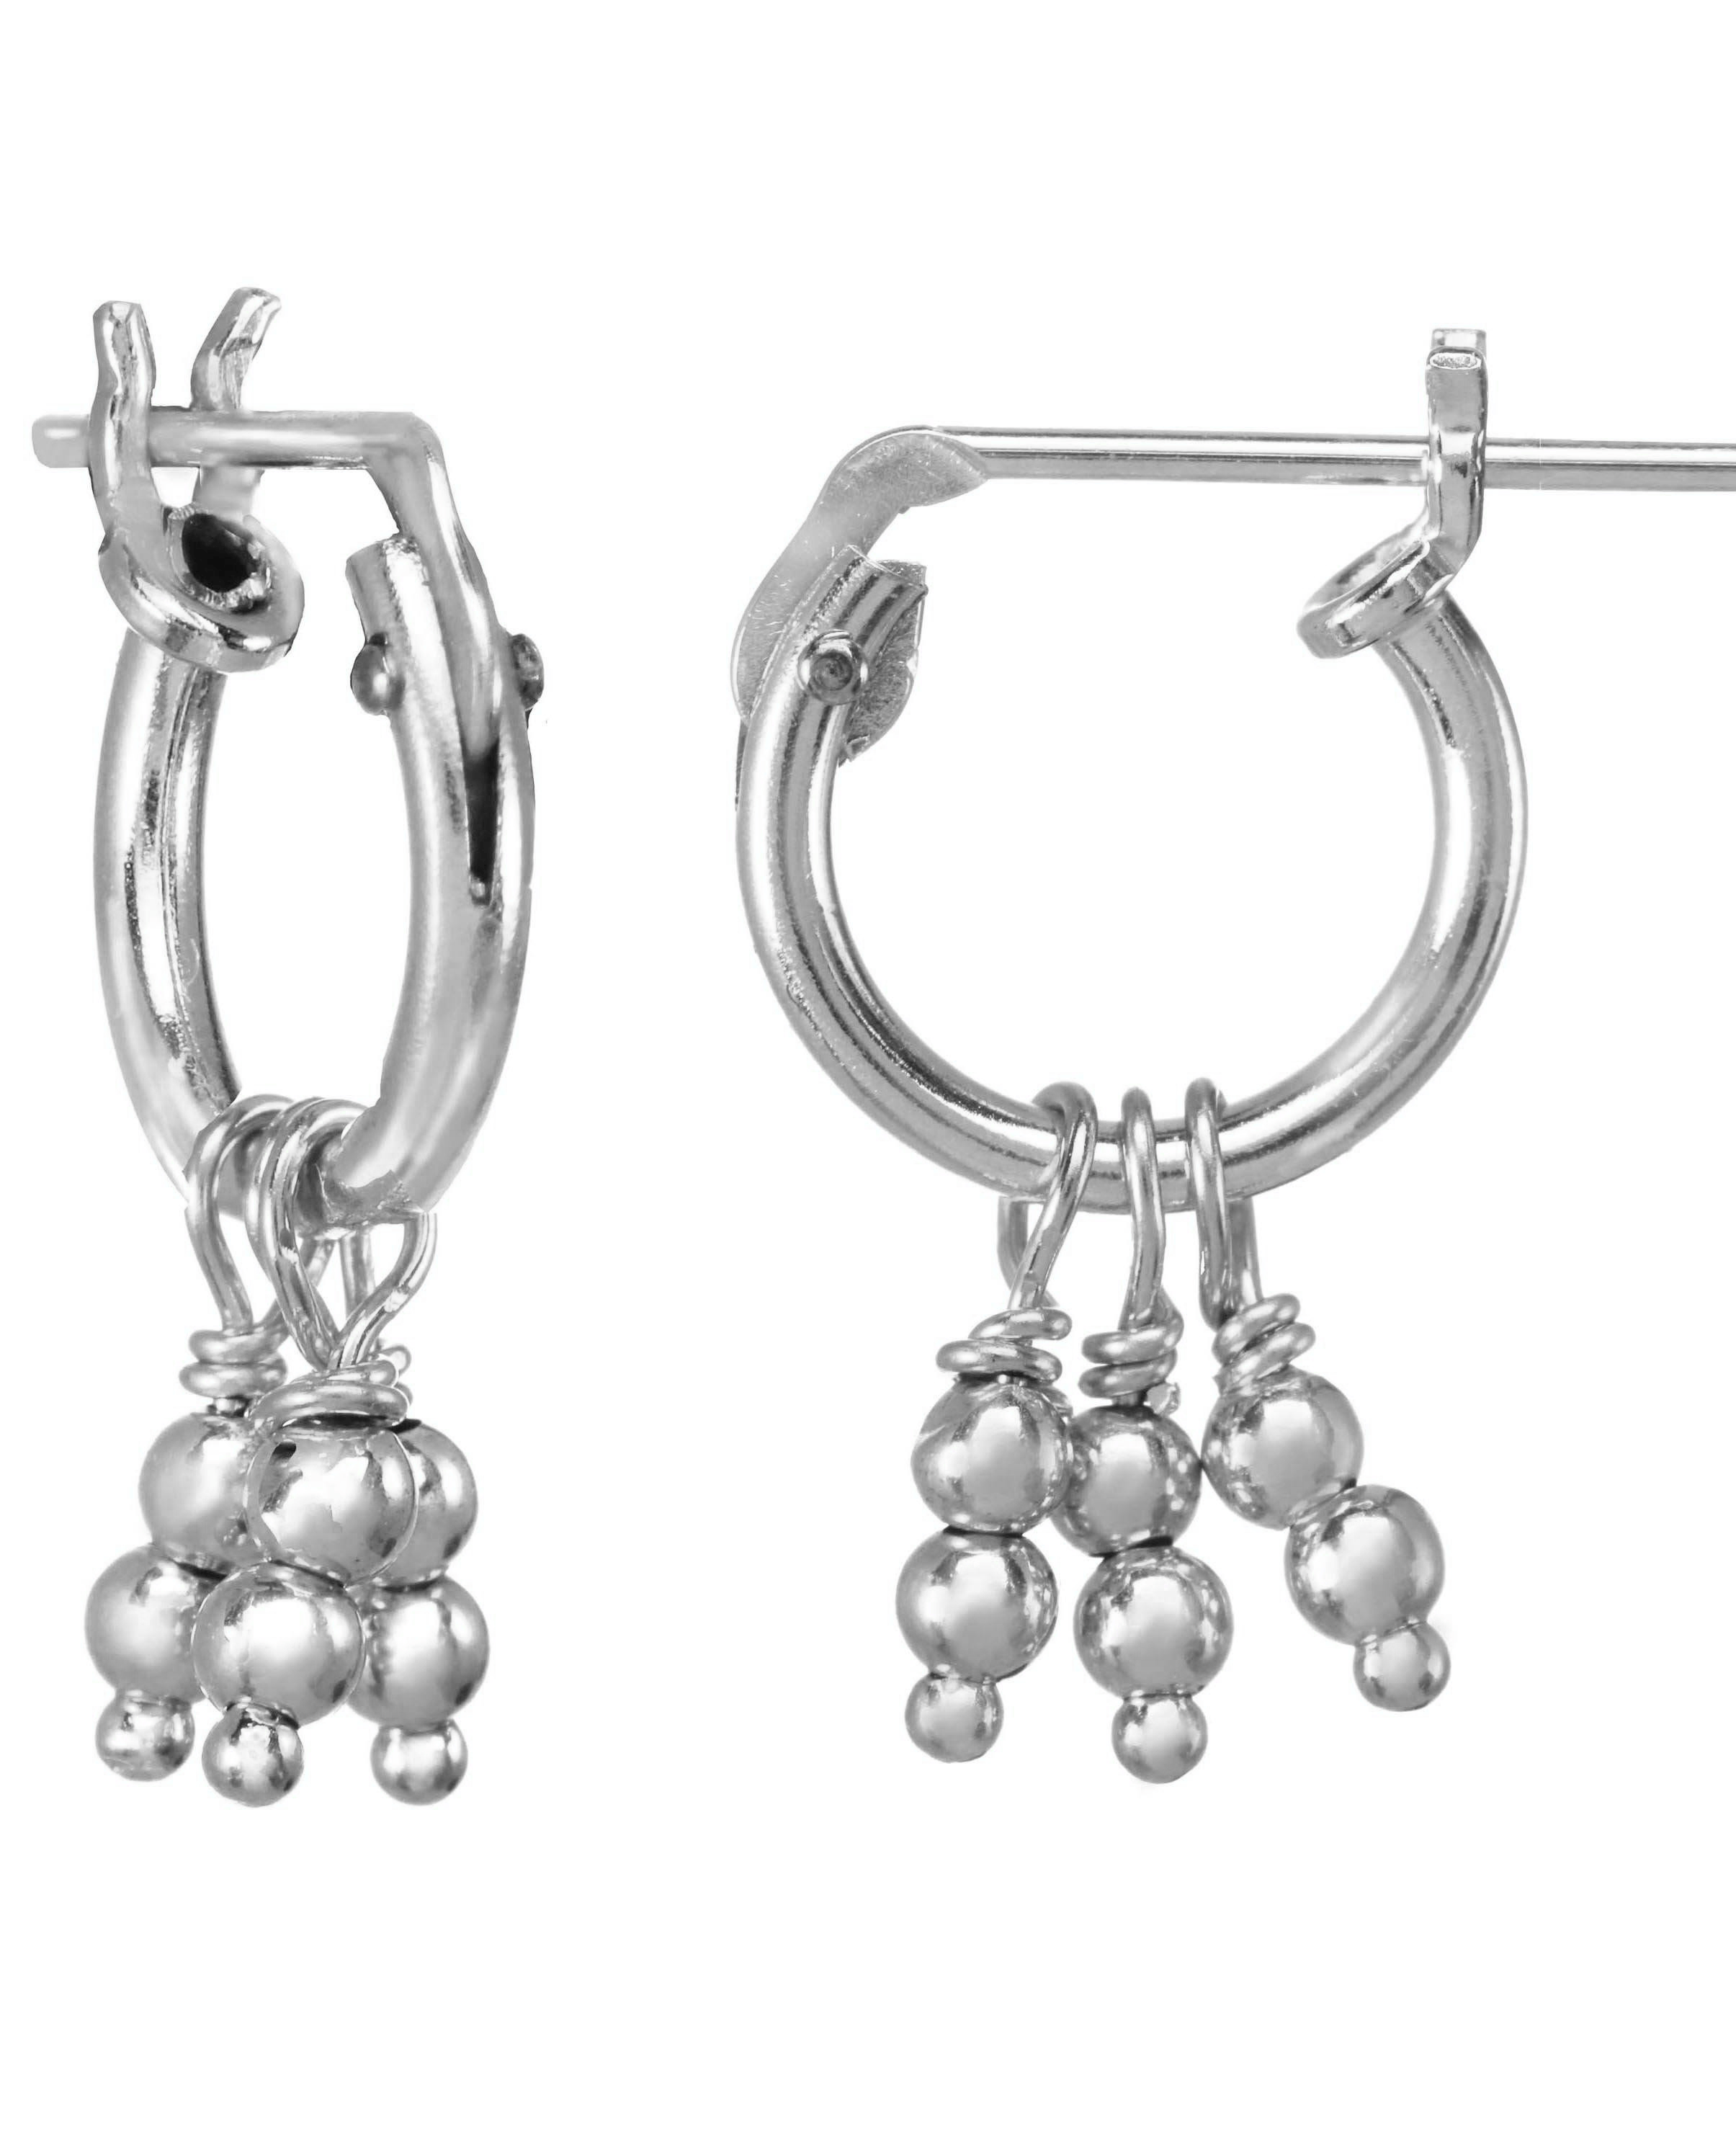 Daphne Hoop Earrings by Kozakh. 10mm Snap closure hoops crafted in Sterling Silver, featuring dangling silver balls.